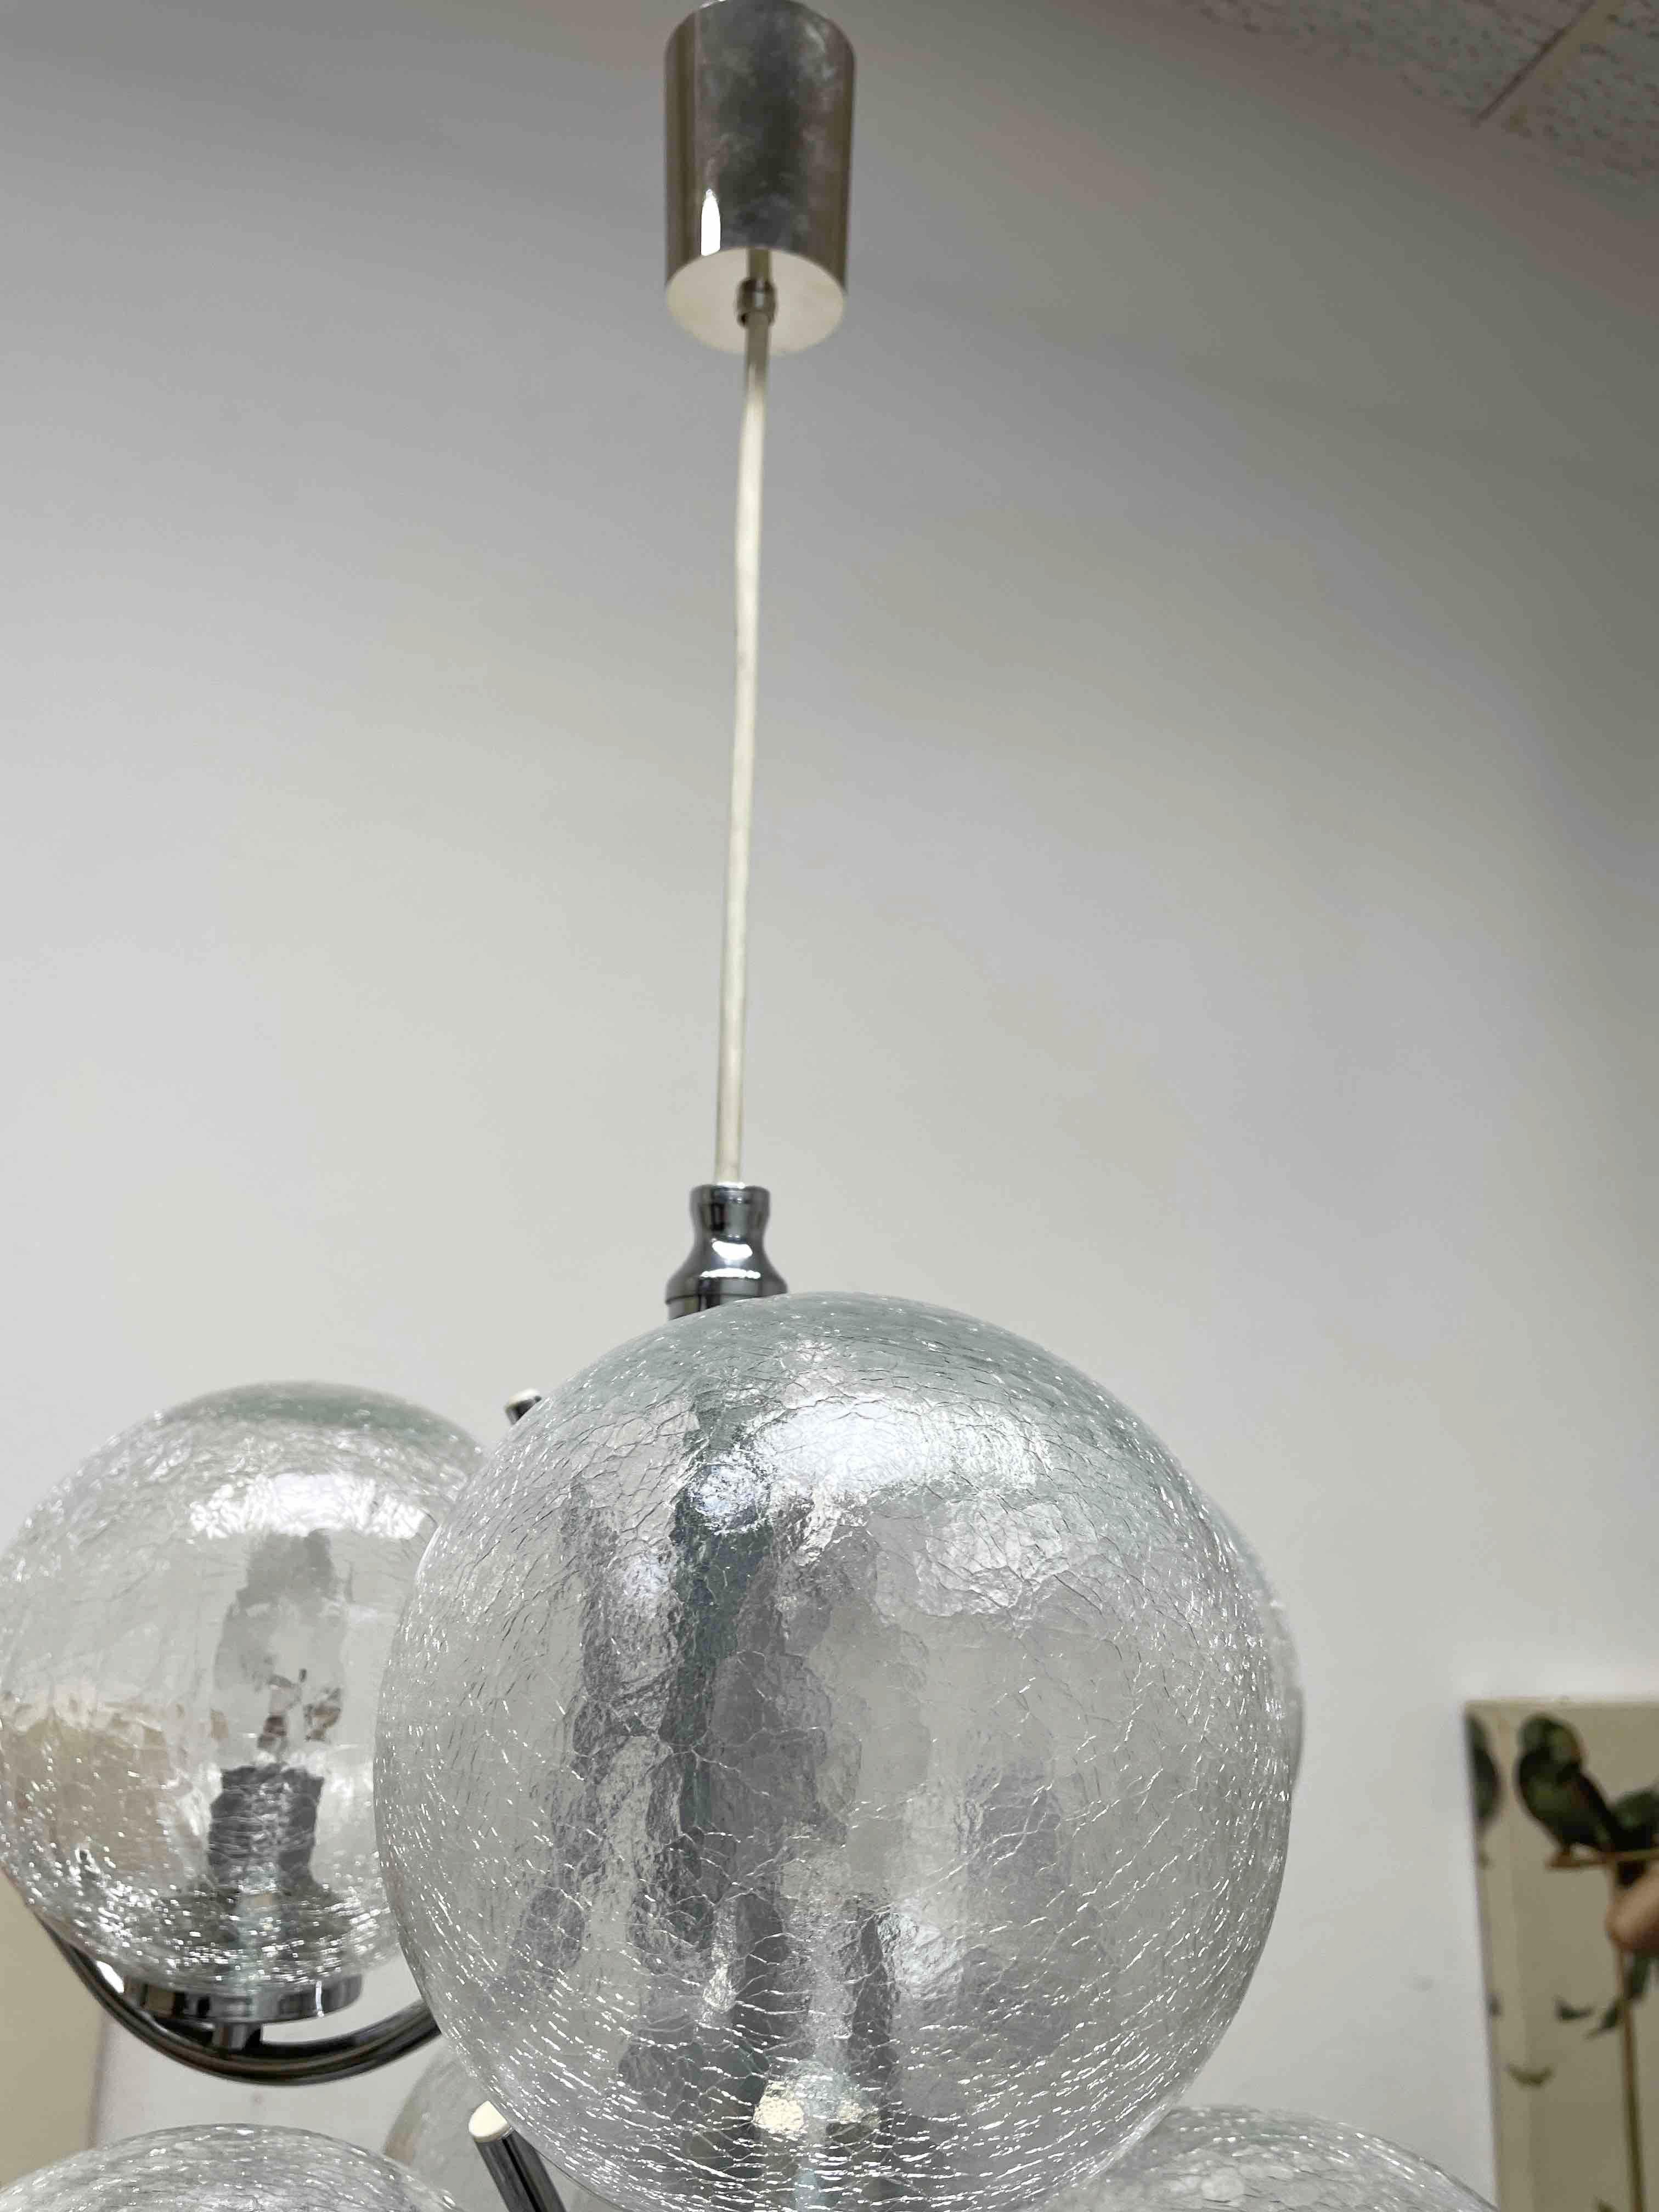 2 Tiered Richard Essig 6-Arm Space Age Chandelier, 1970s, Germany For Sale 3